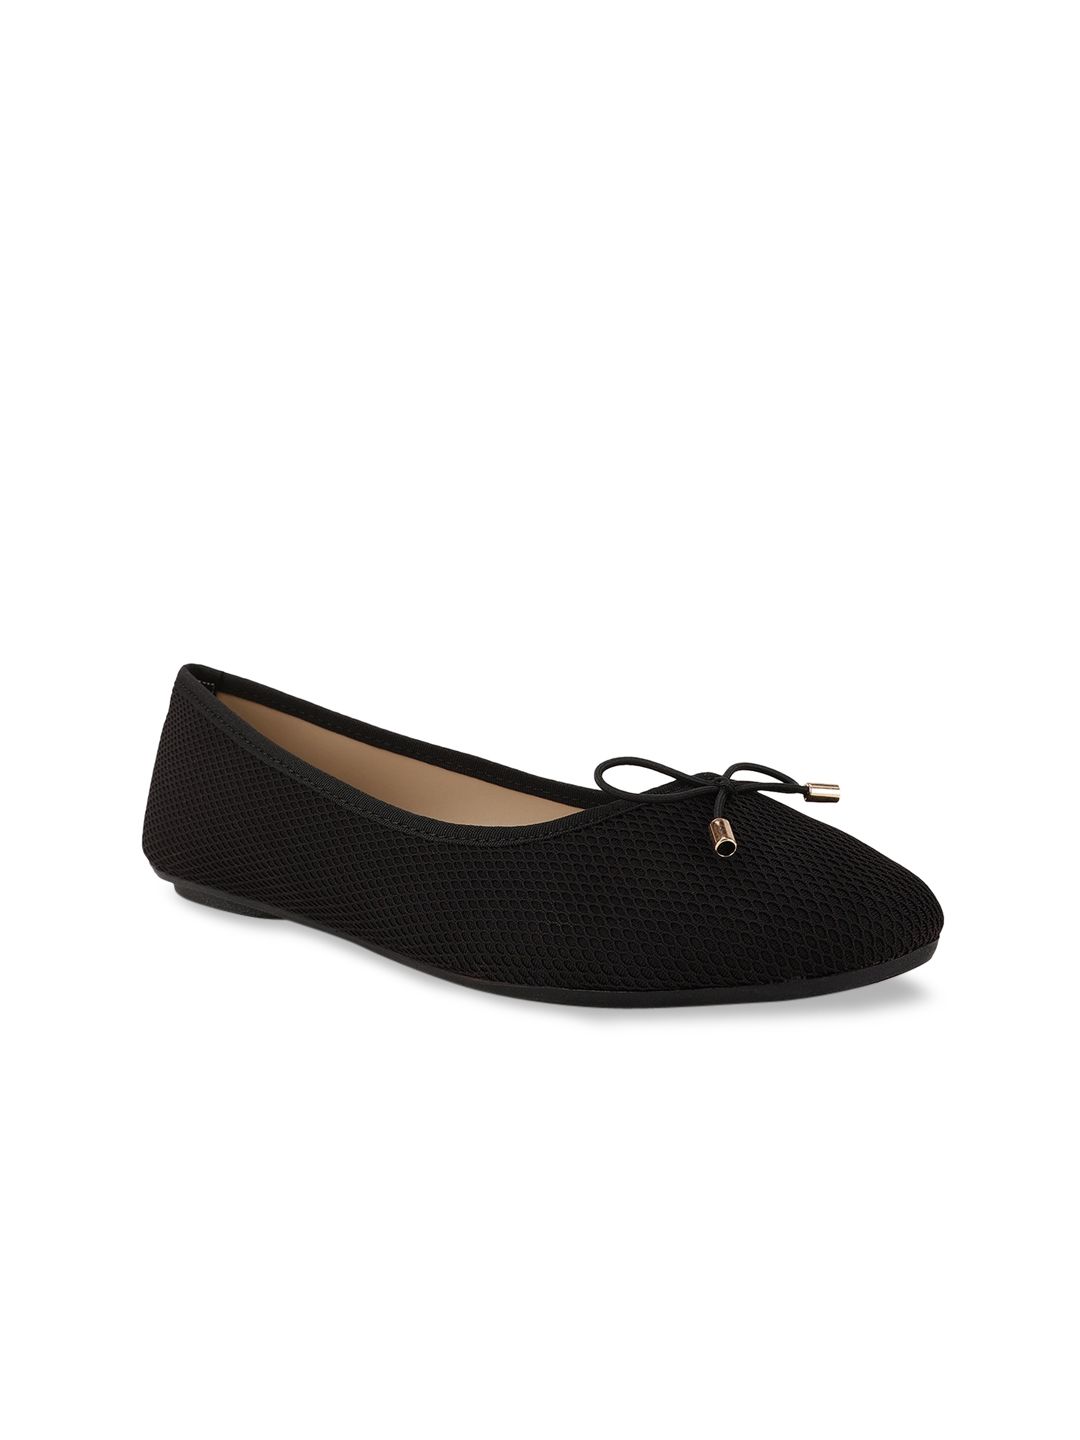 Bata Women Black Ballerinas with Bows Flats Price in India